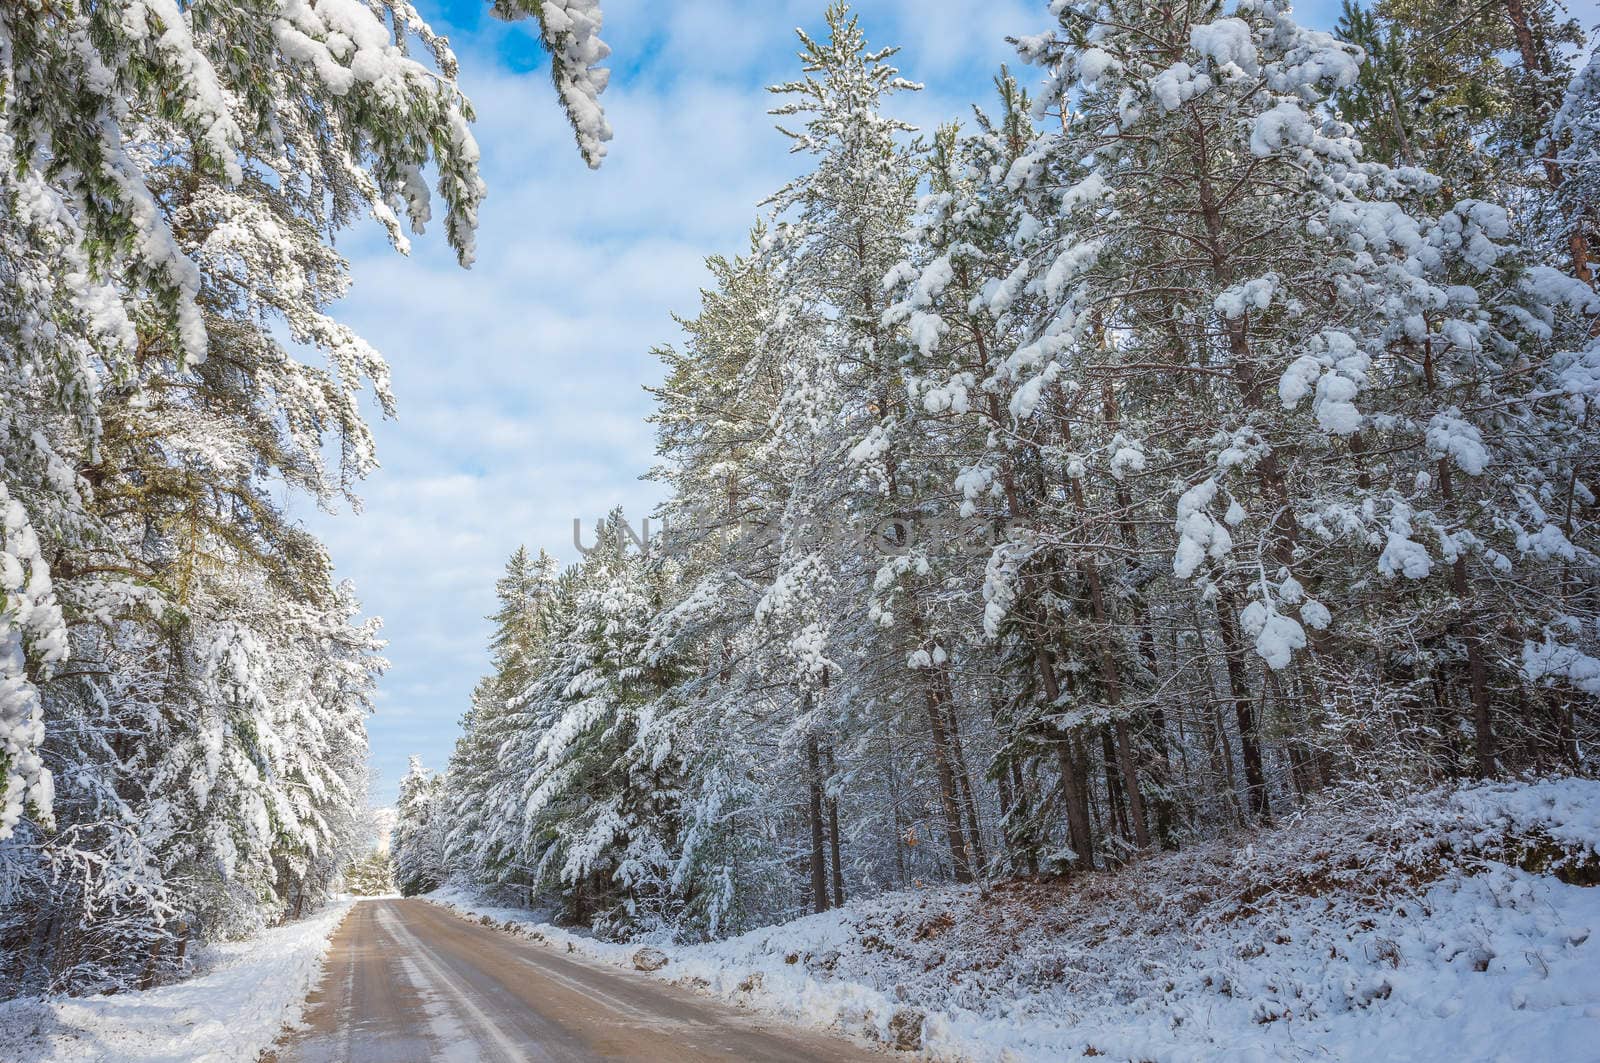 Snow covered pines - beautiful forests along rural roads. by valleyboi63